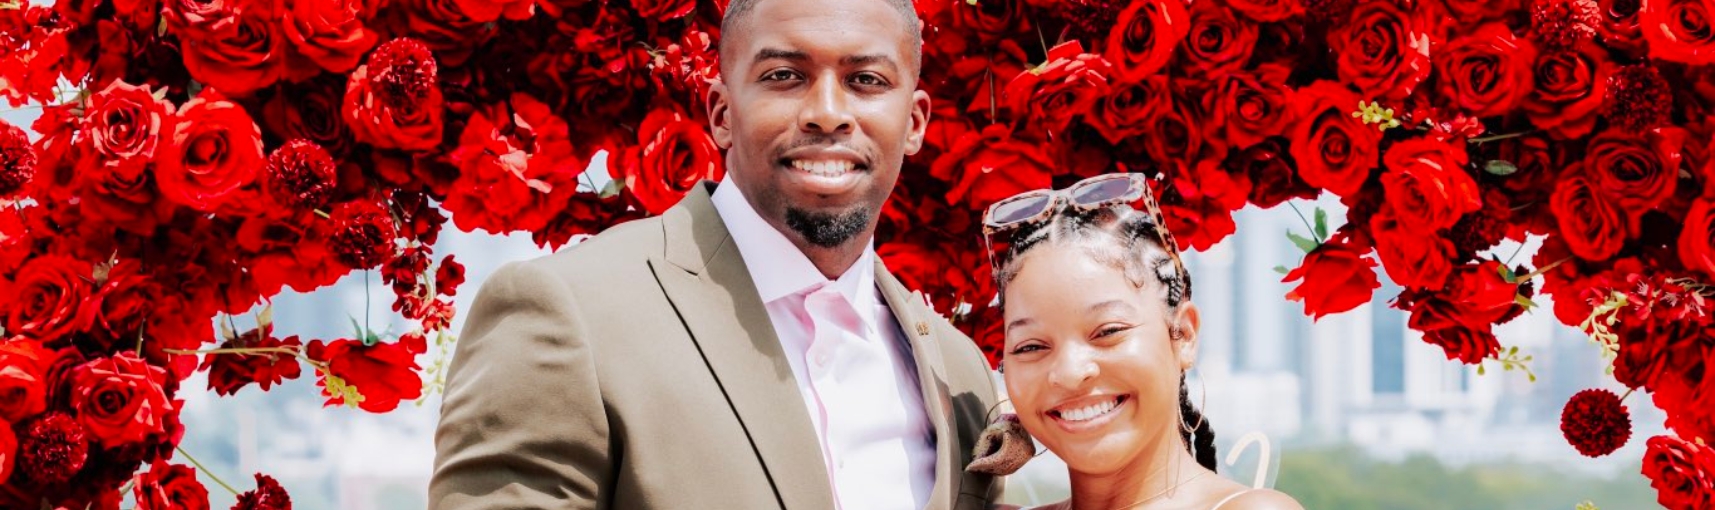 A Black man in a olive green suit stands next to a Black woman. They are in front of an arch made of rose petals.